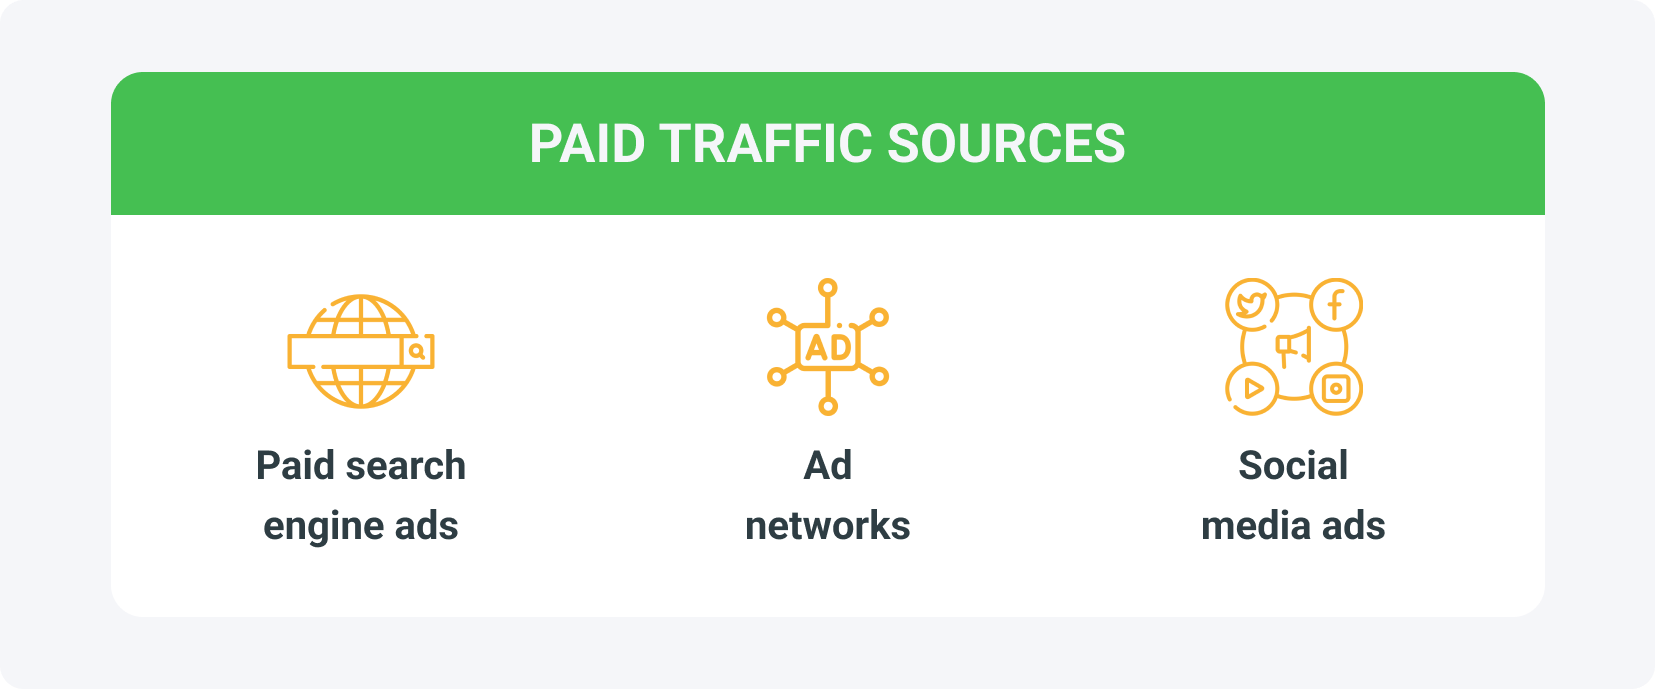 Paid sources of affiliate marketing traffic include paid search ads, ad networks, and paid social media ads.